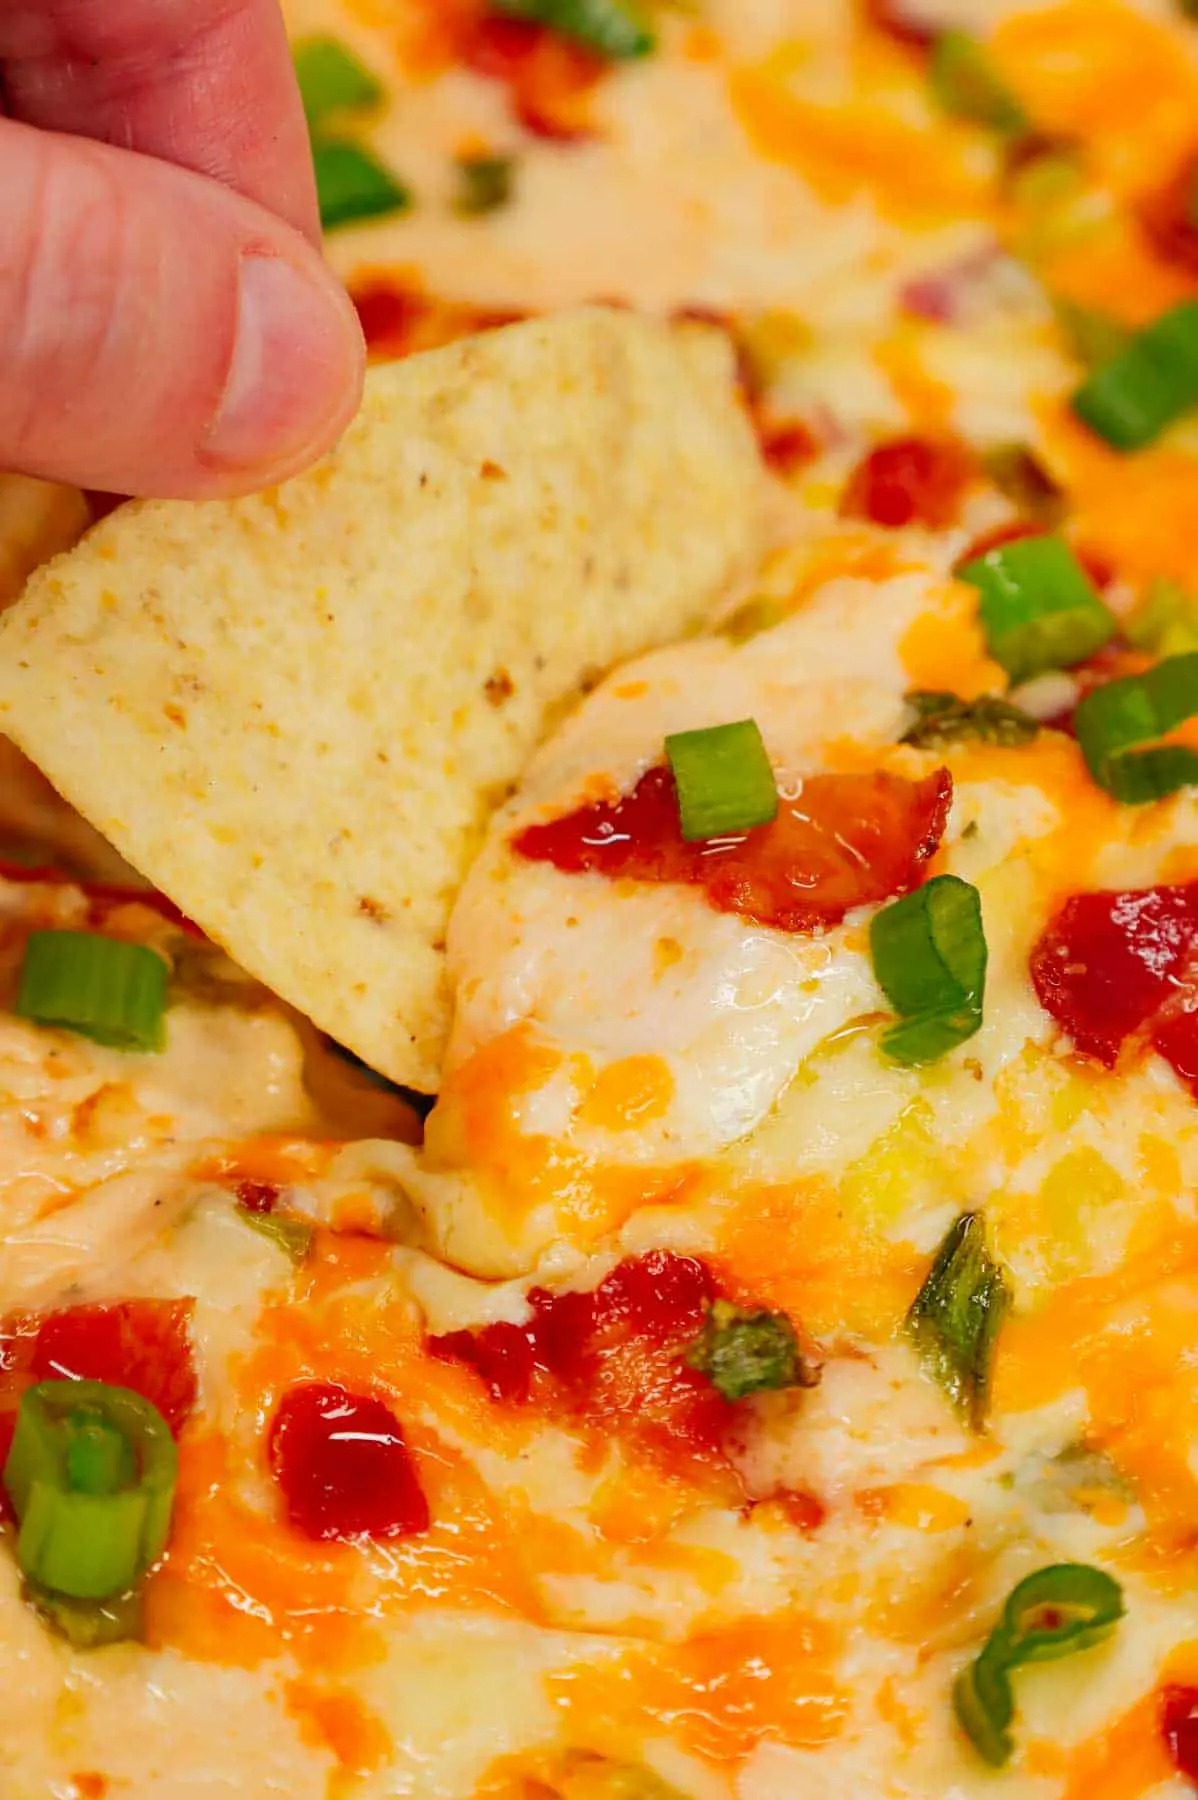 Cracked Out Corn Dip is a delicious hot dip recipe loaded with cream cheese, corn, sour cream, ranch dressing mix, bacon, green onions, cheddar cheese and mozzarella cheese.